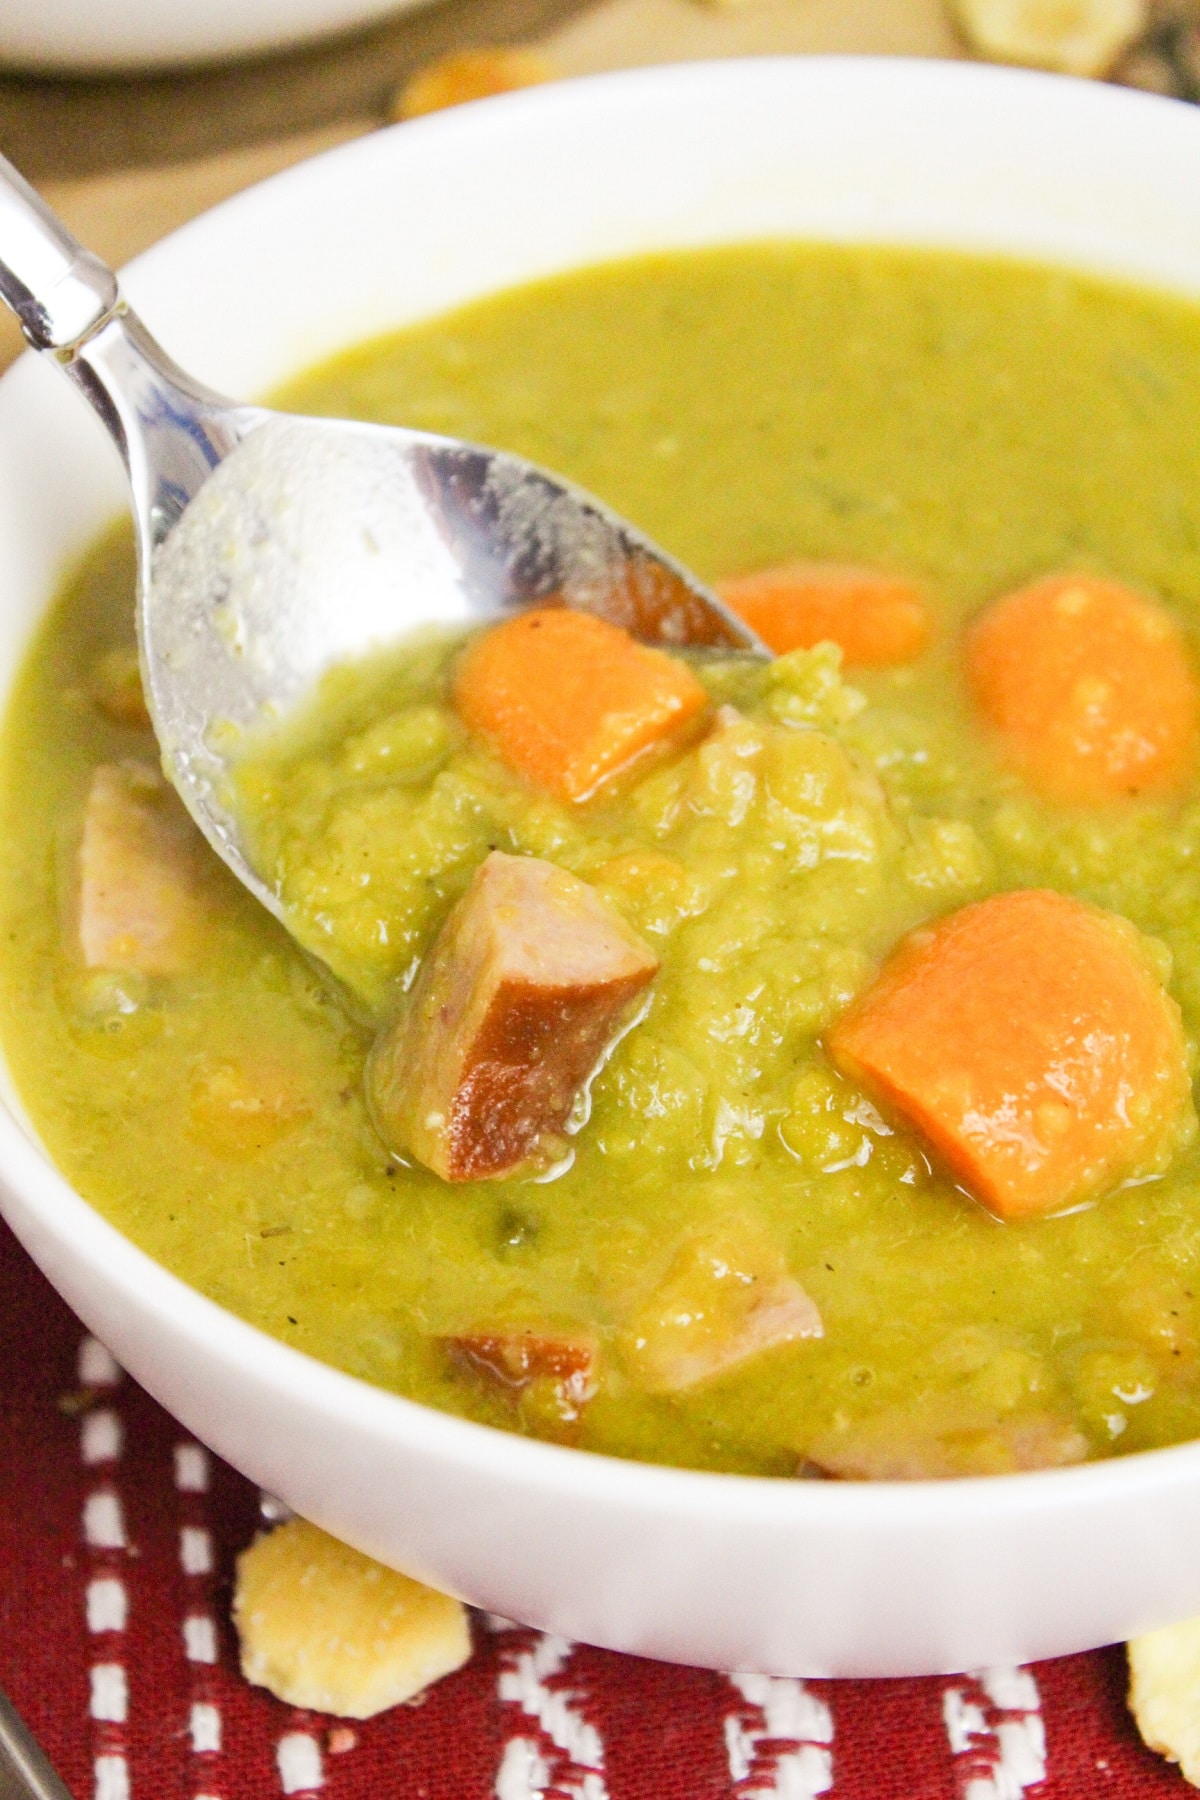 split pea and kielbasa soup scooped from the bowl